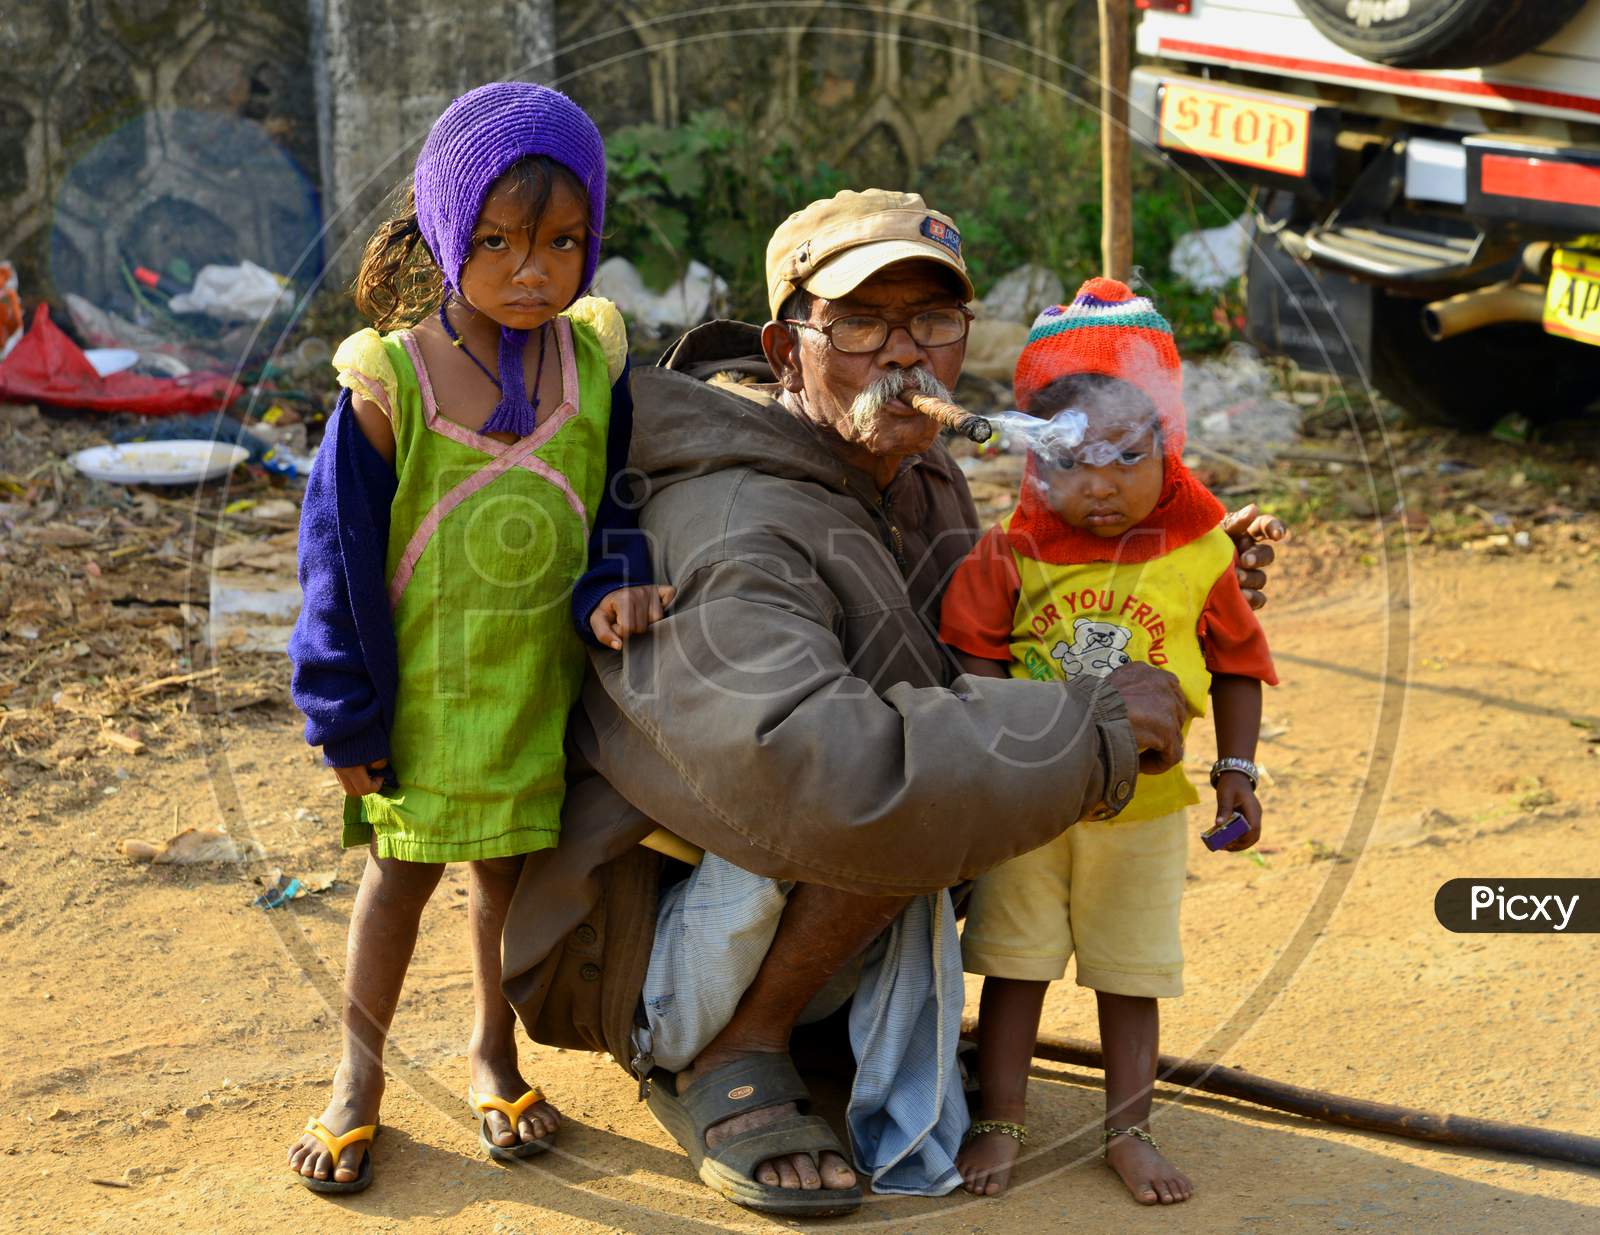 An Old Man Smoking Tobacco With Children With Him